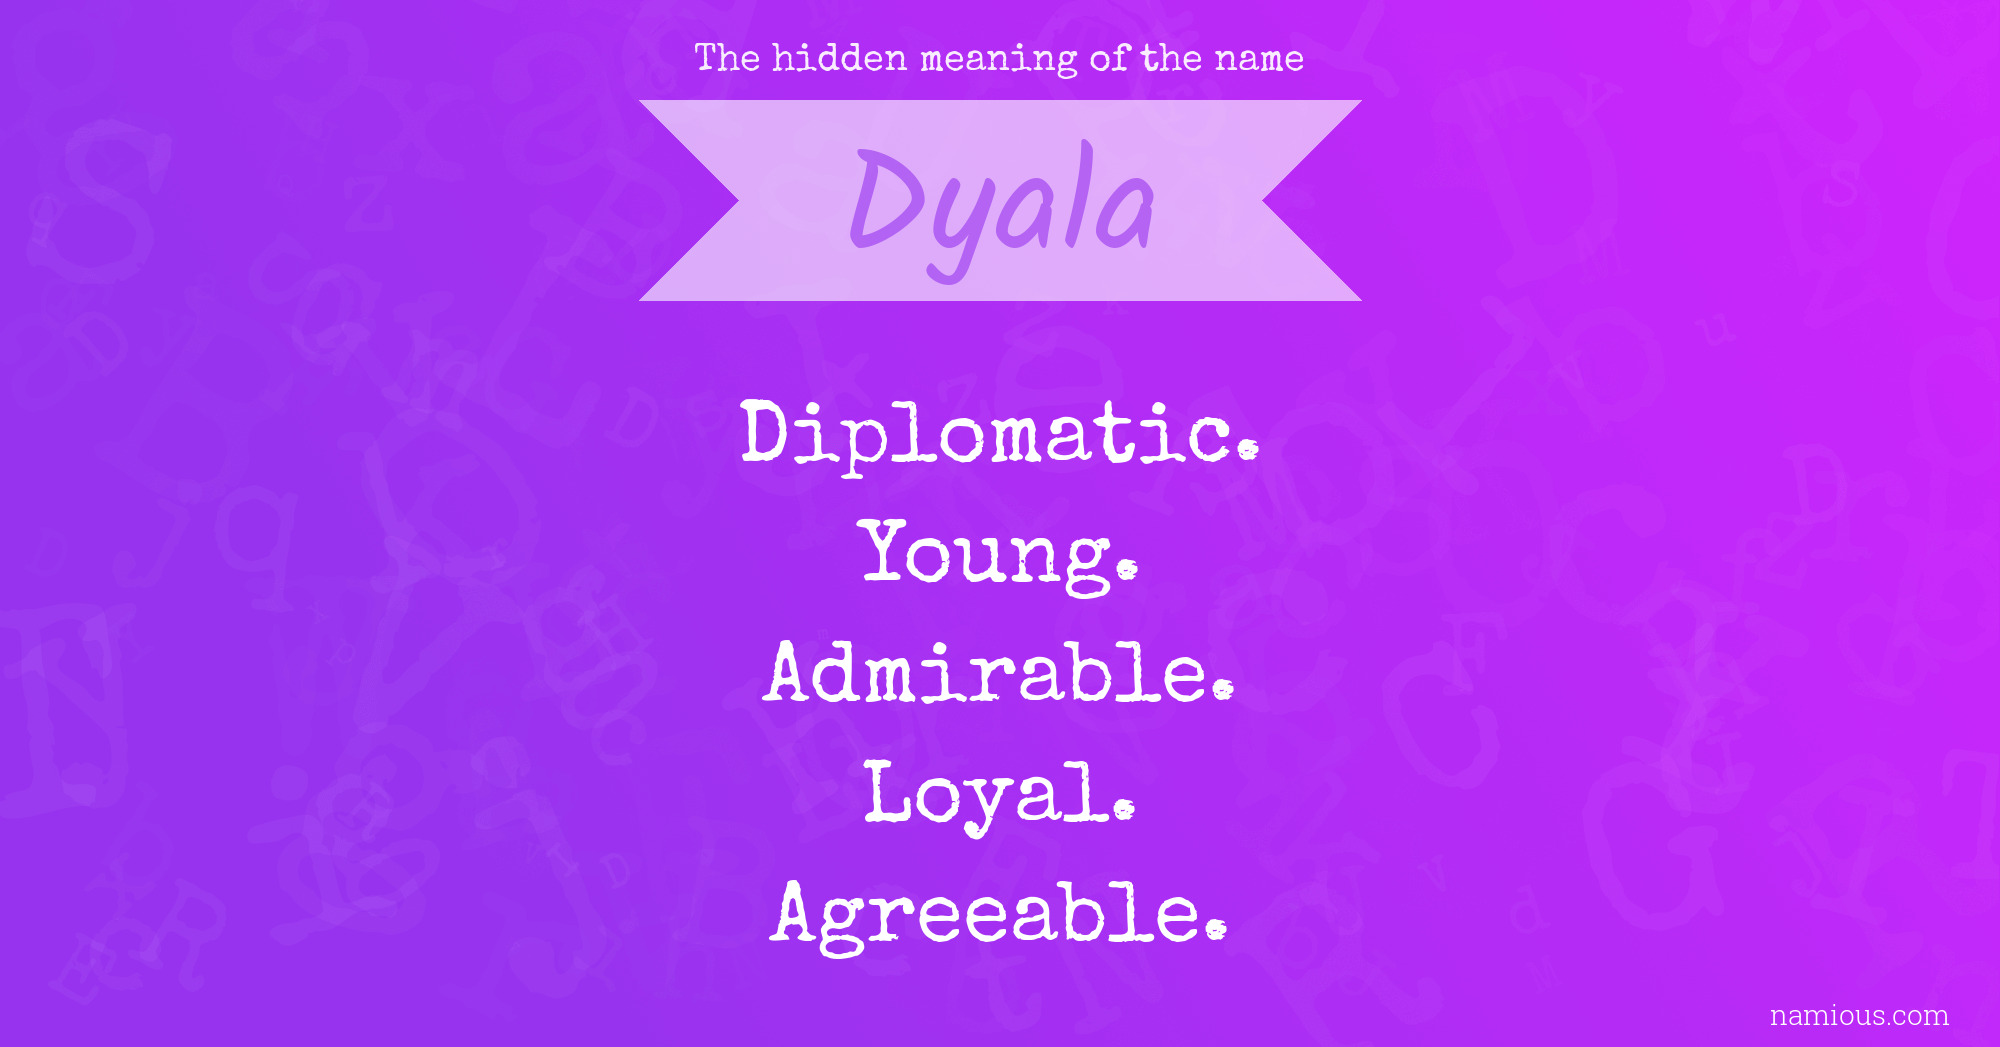 The hidden meaning of the name Dyala